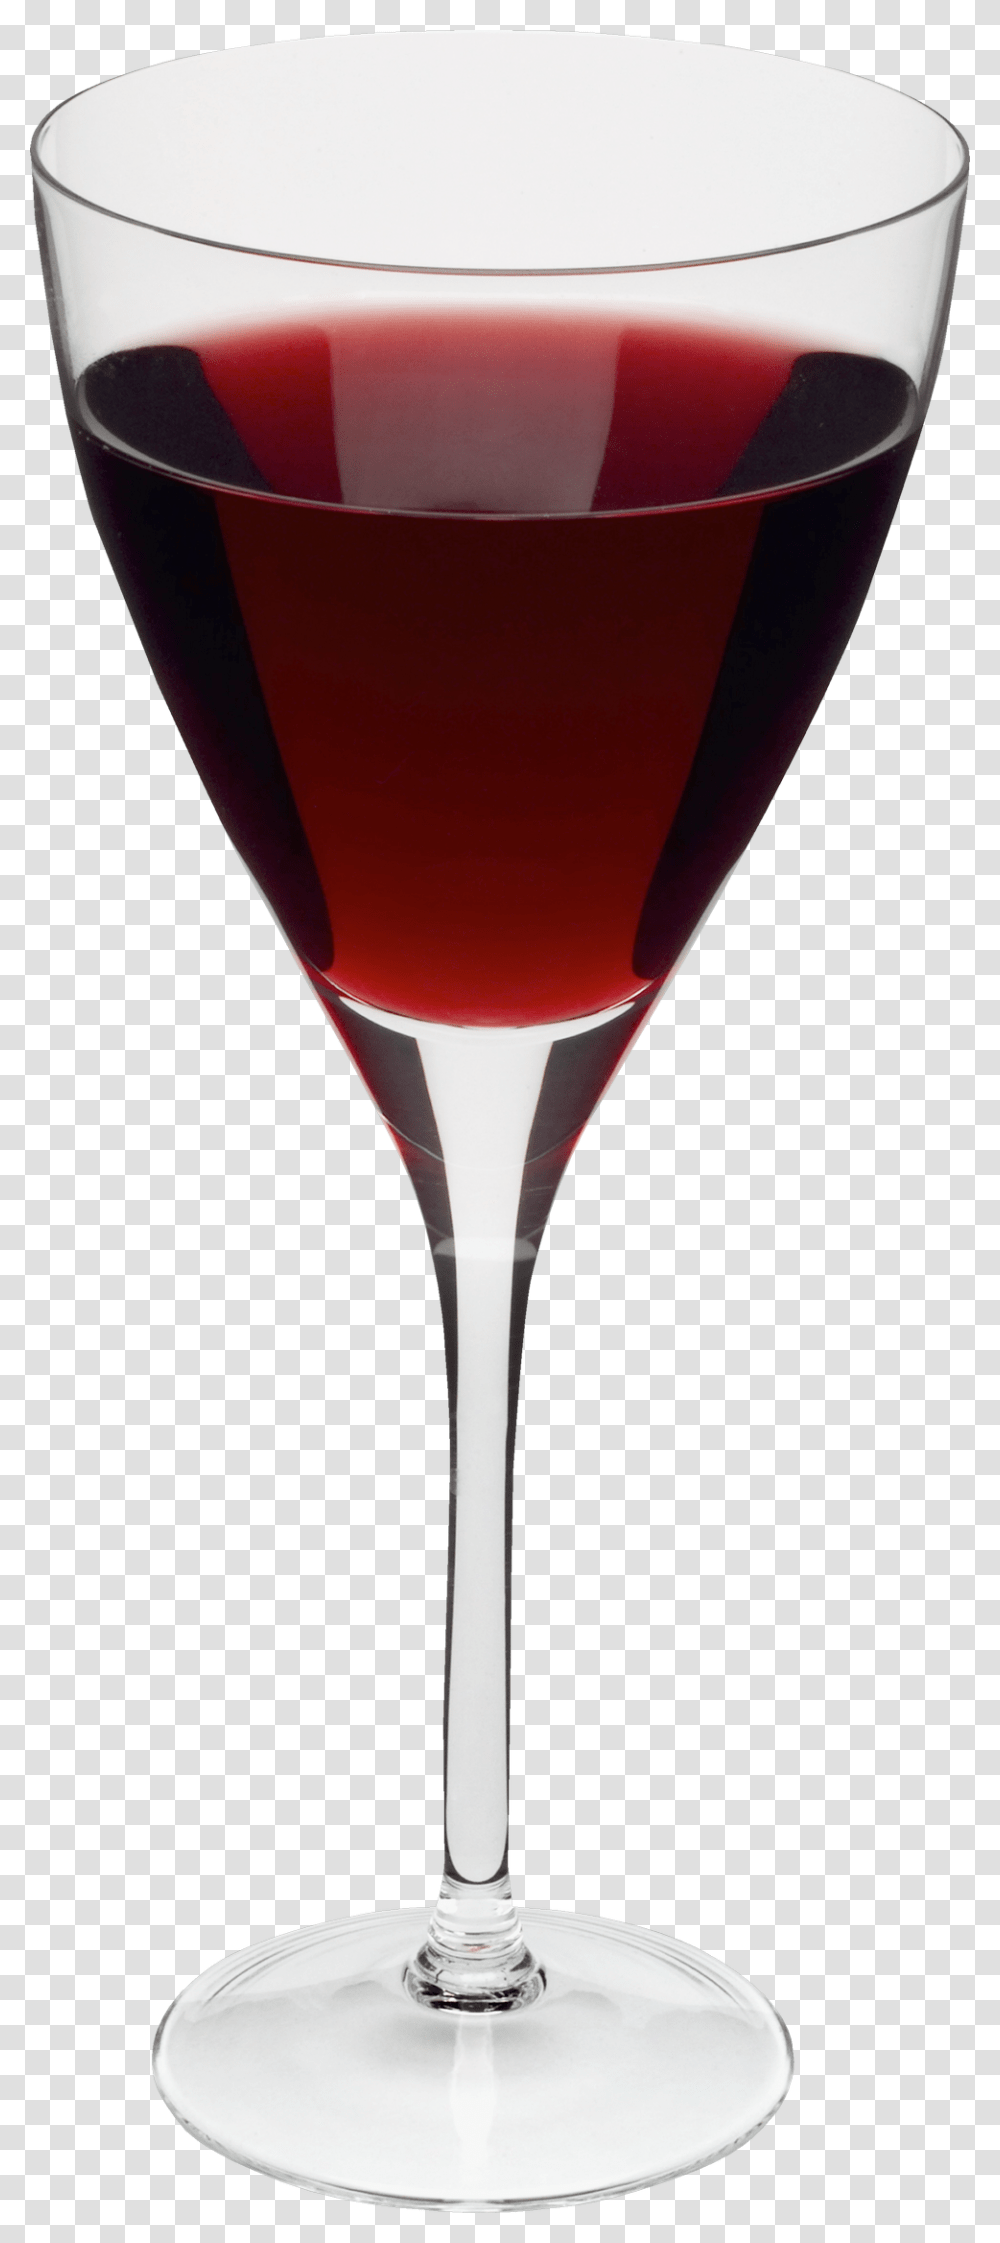 Wine Glass Wine Glass Hd, Red Wine, Alcohol, Beverage, Drink Transparent Png